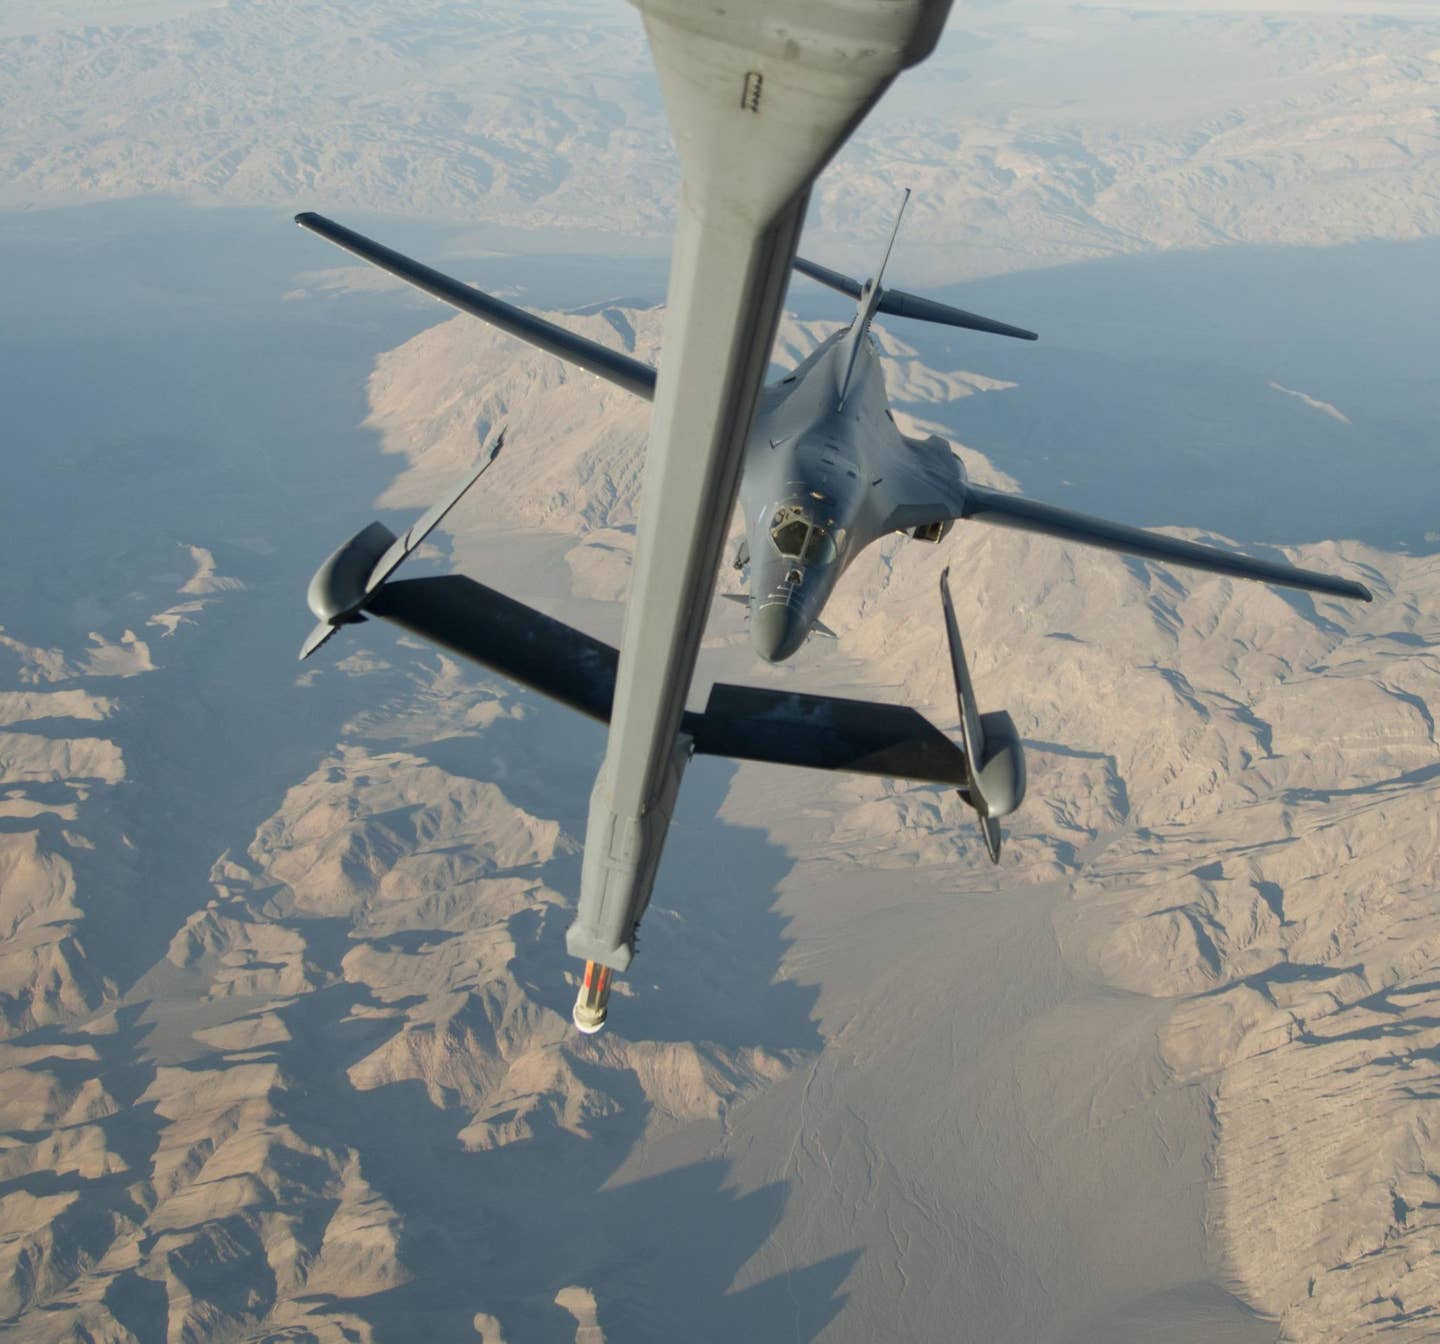 A B-1B Lancer taking part in Green Flag, an exercise similar to Red Flag, over Nellis Air Force Base. (USAF photo)